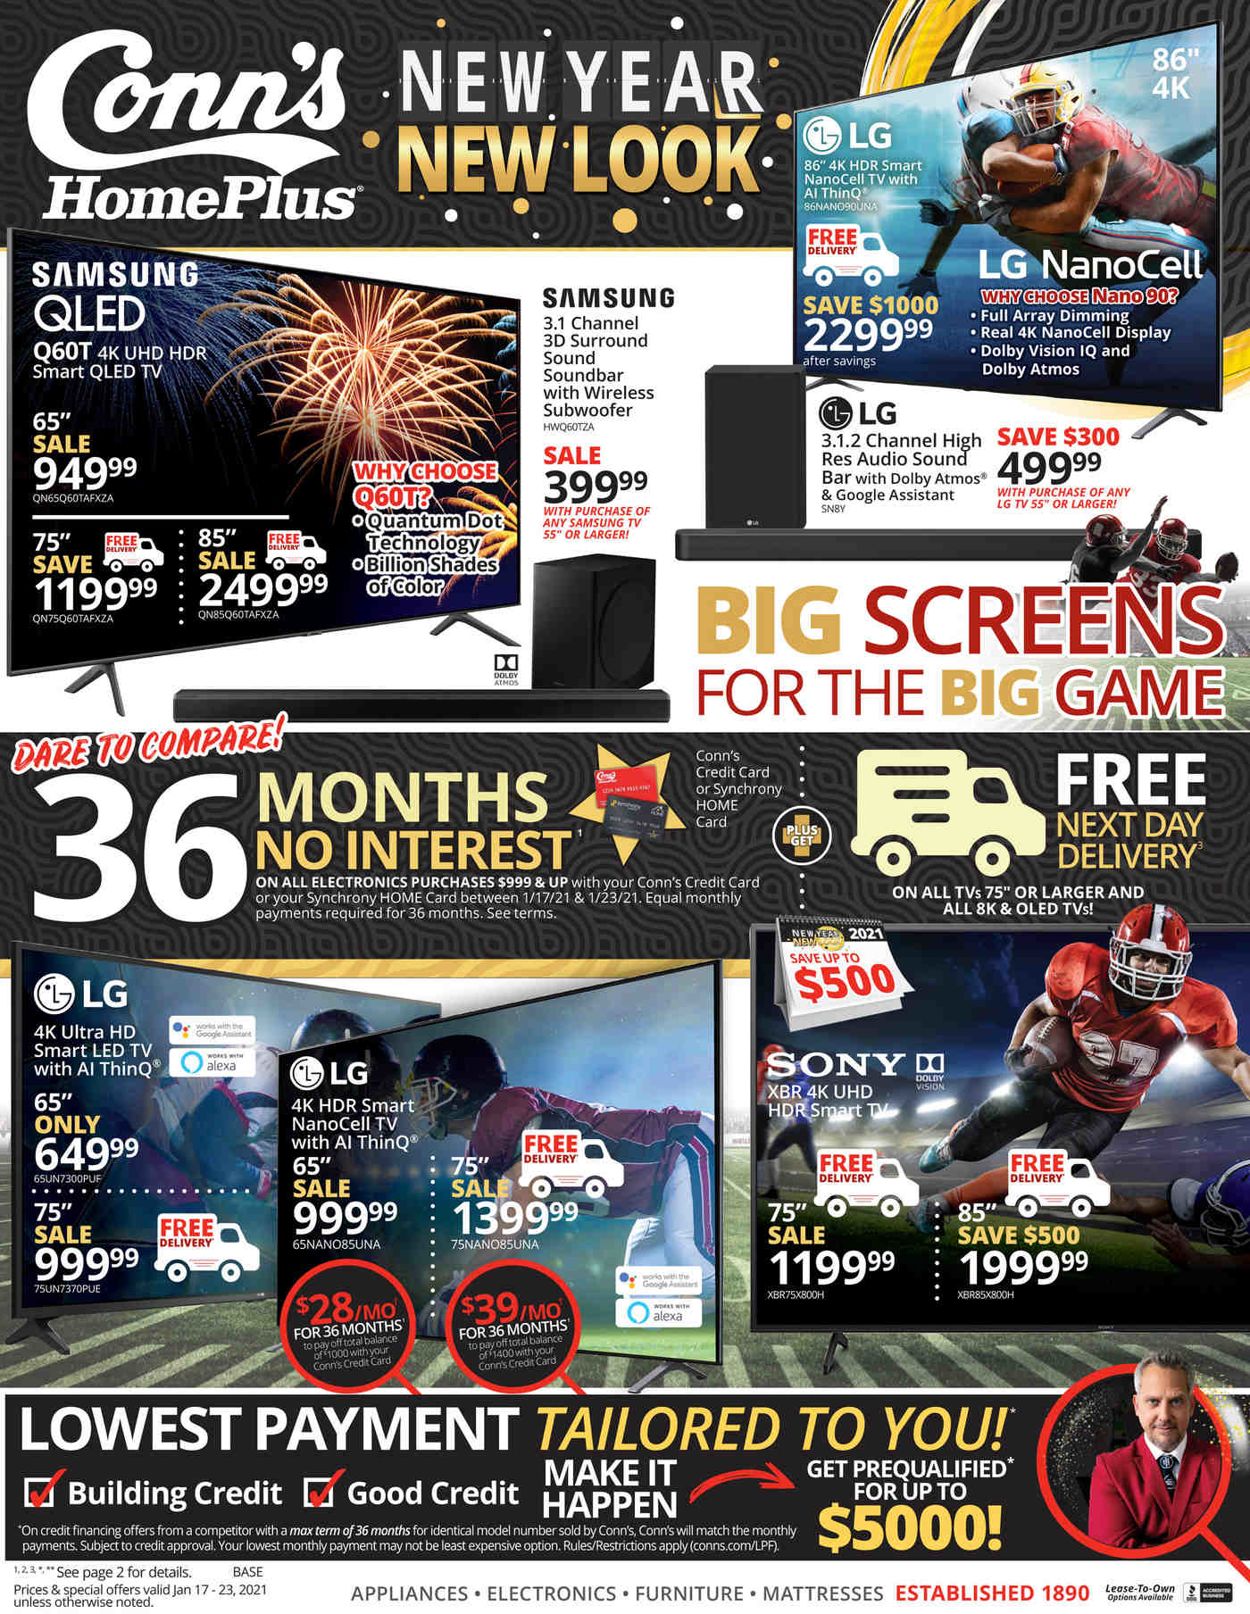 Conn's Home Plus Low Prices on Furniture and More 2021 Weekly Ad Circular - valid 01/17-01/23/2021